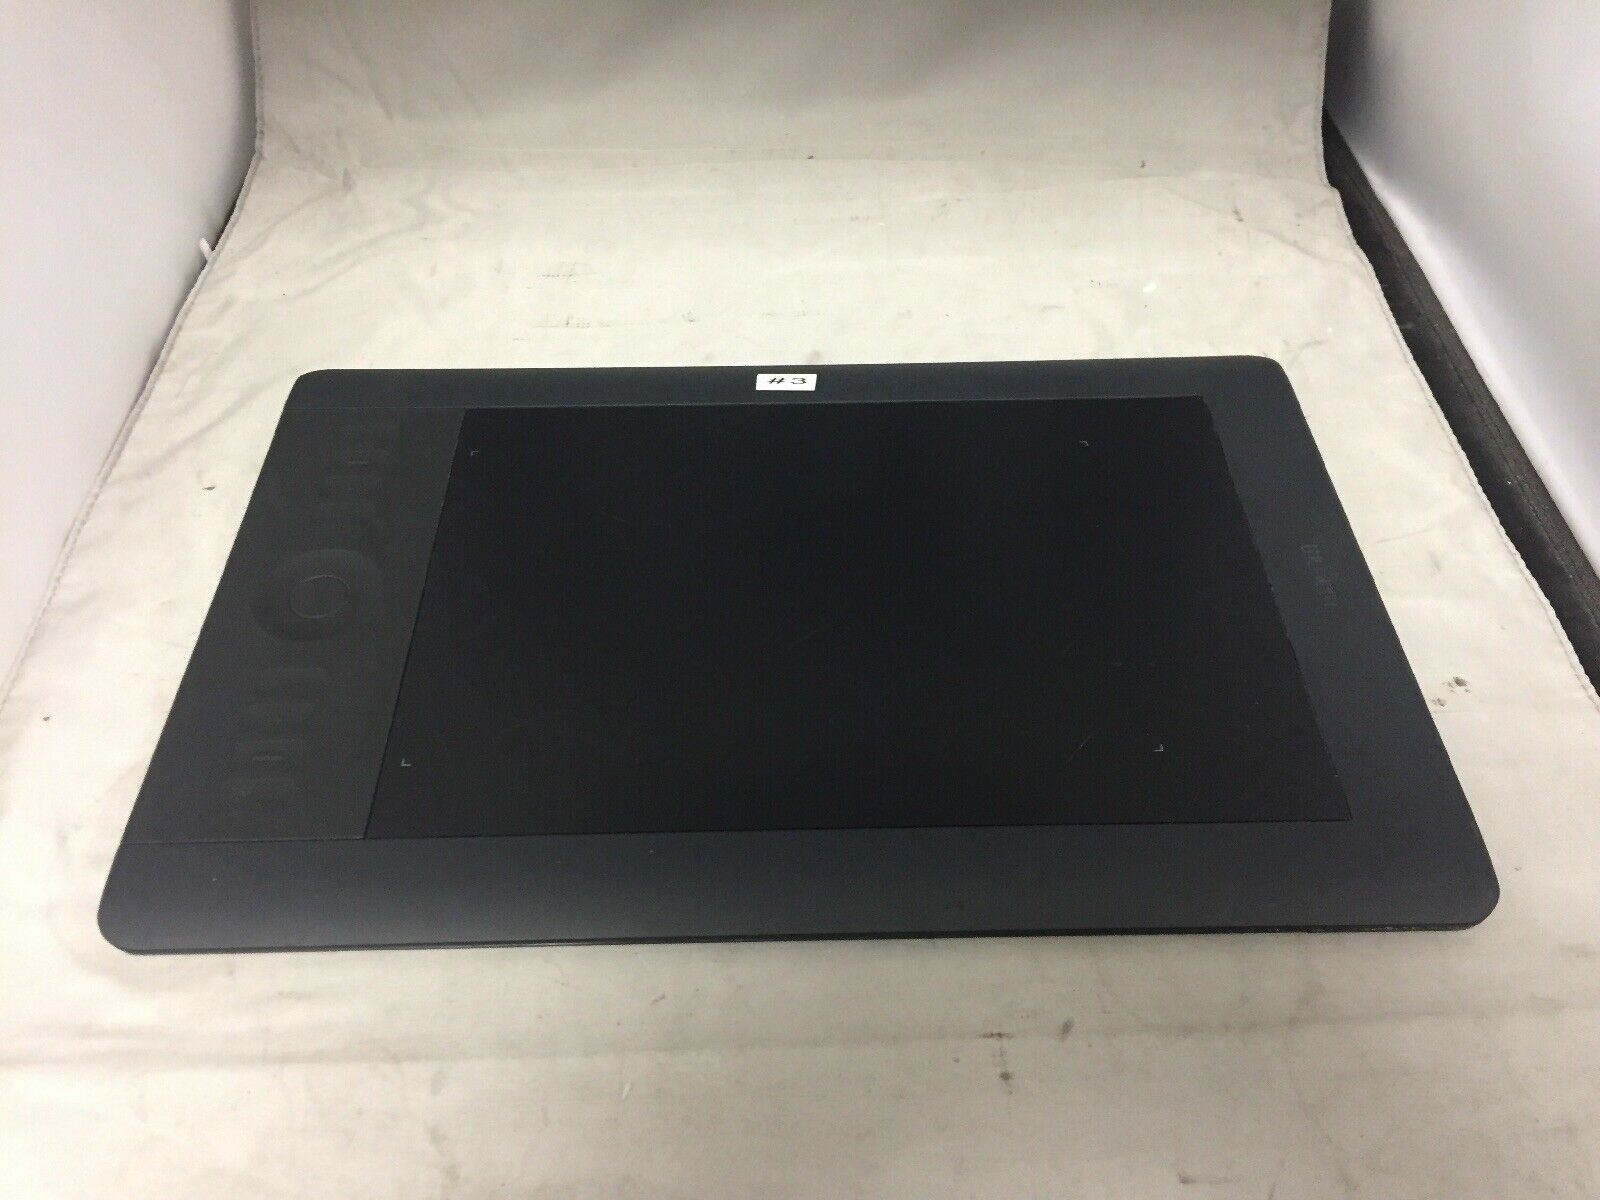 Wacom Intuos 5 Touch Graphic Drawing Tablet PTH-650